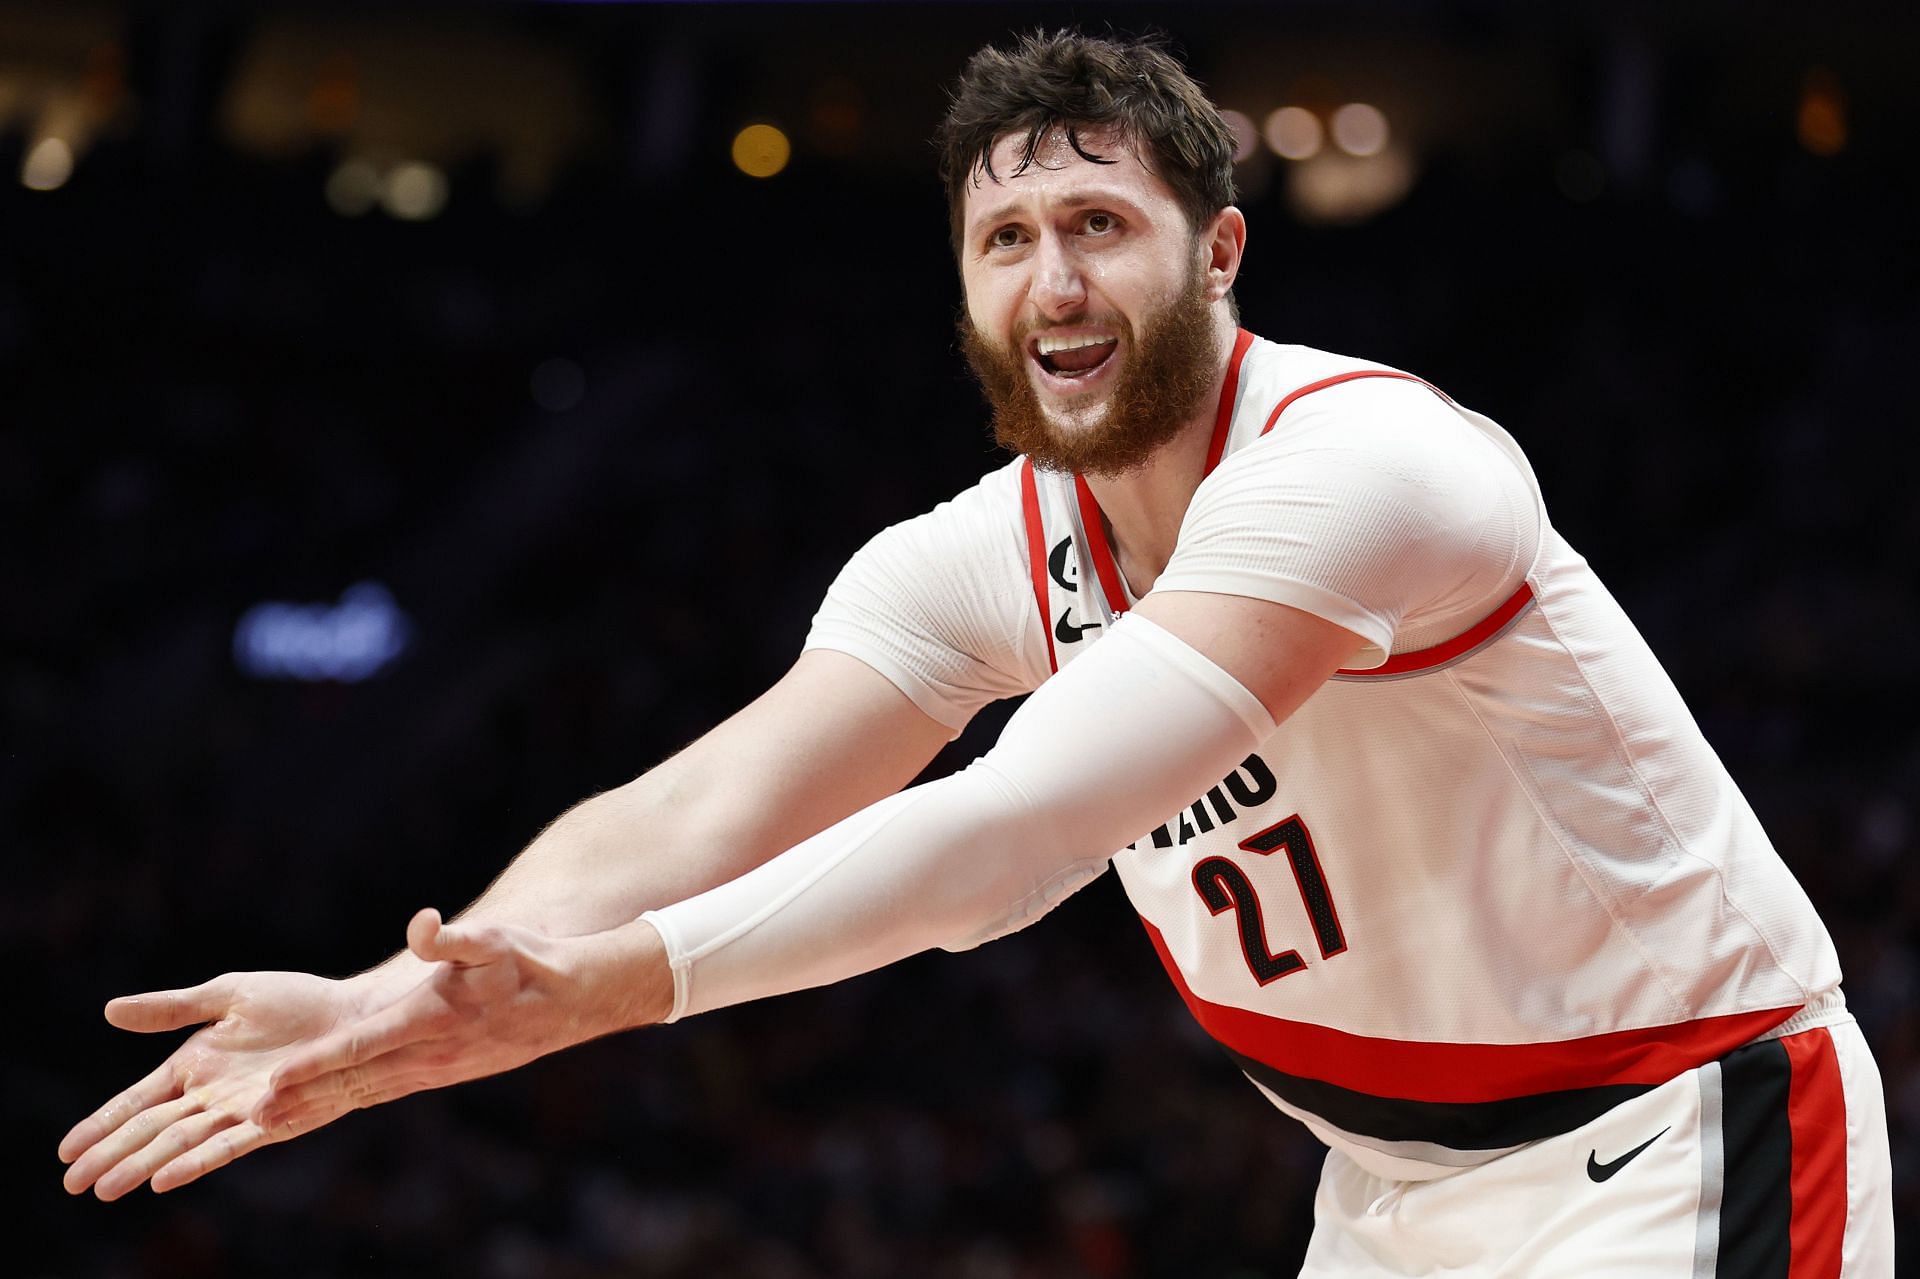 Jake Fischer Says Trail Blazers Are Currently In Trade Talks With